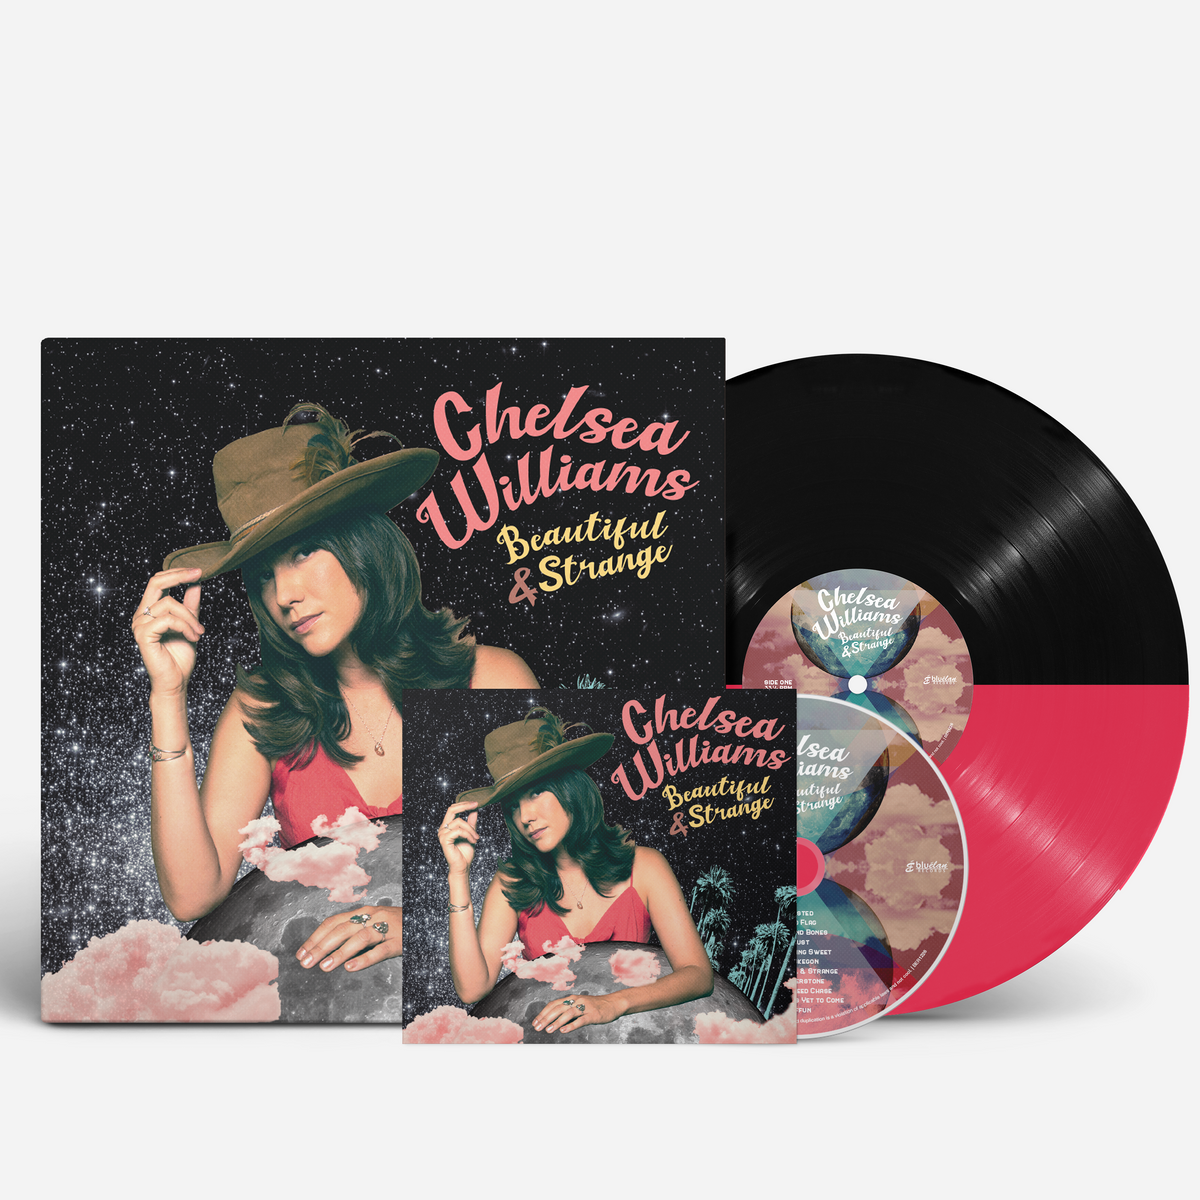 Beautiful and Strange - CD and LP Combo